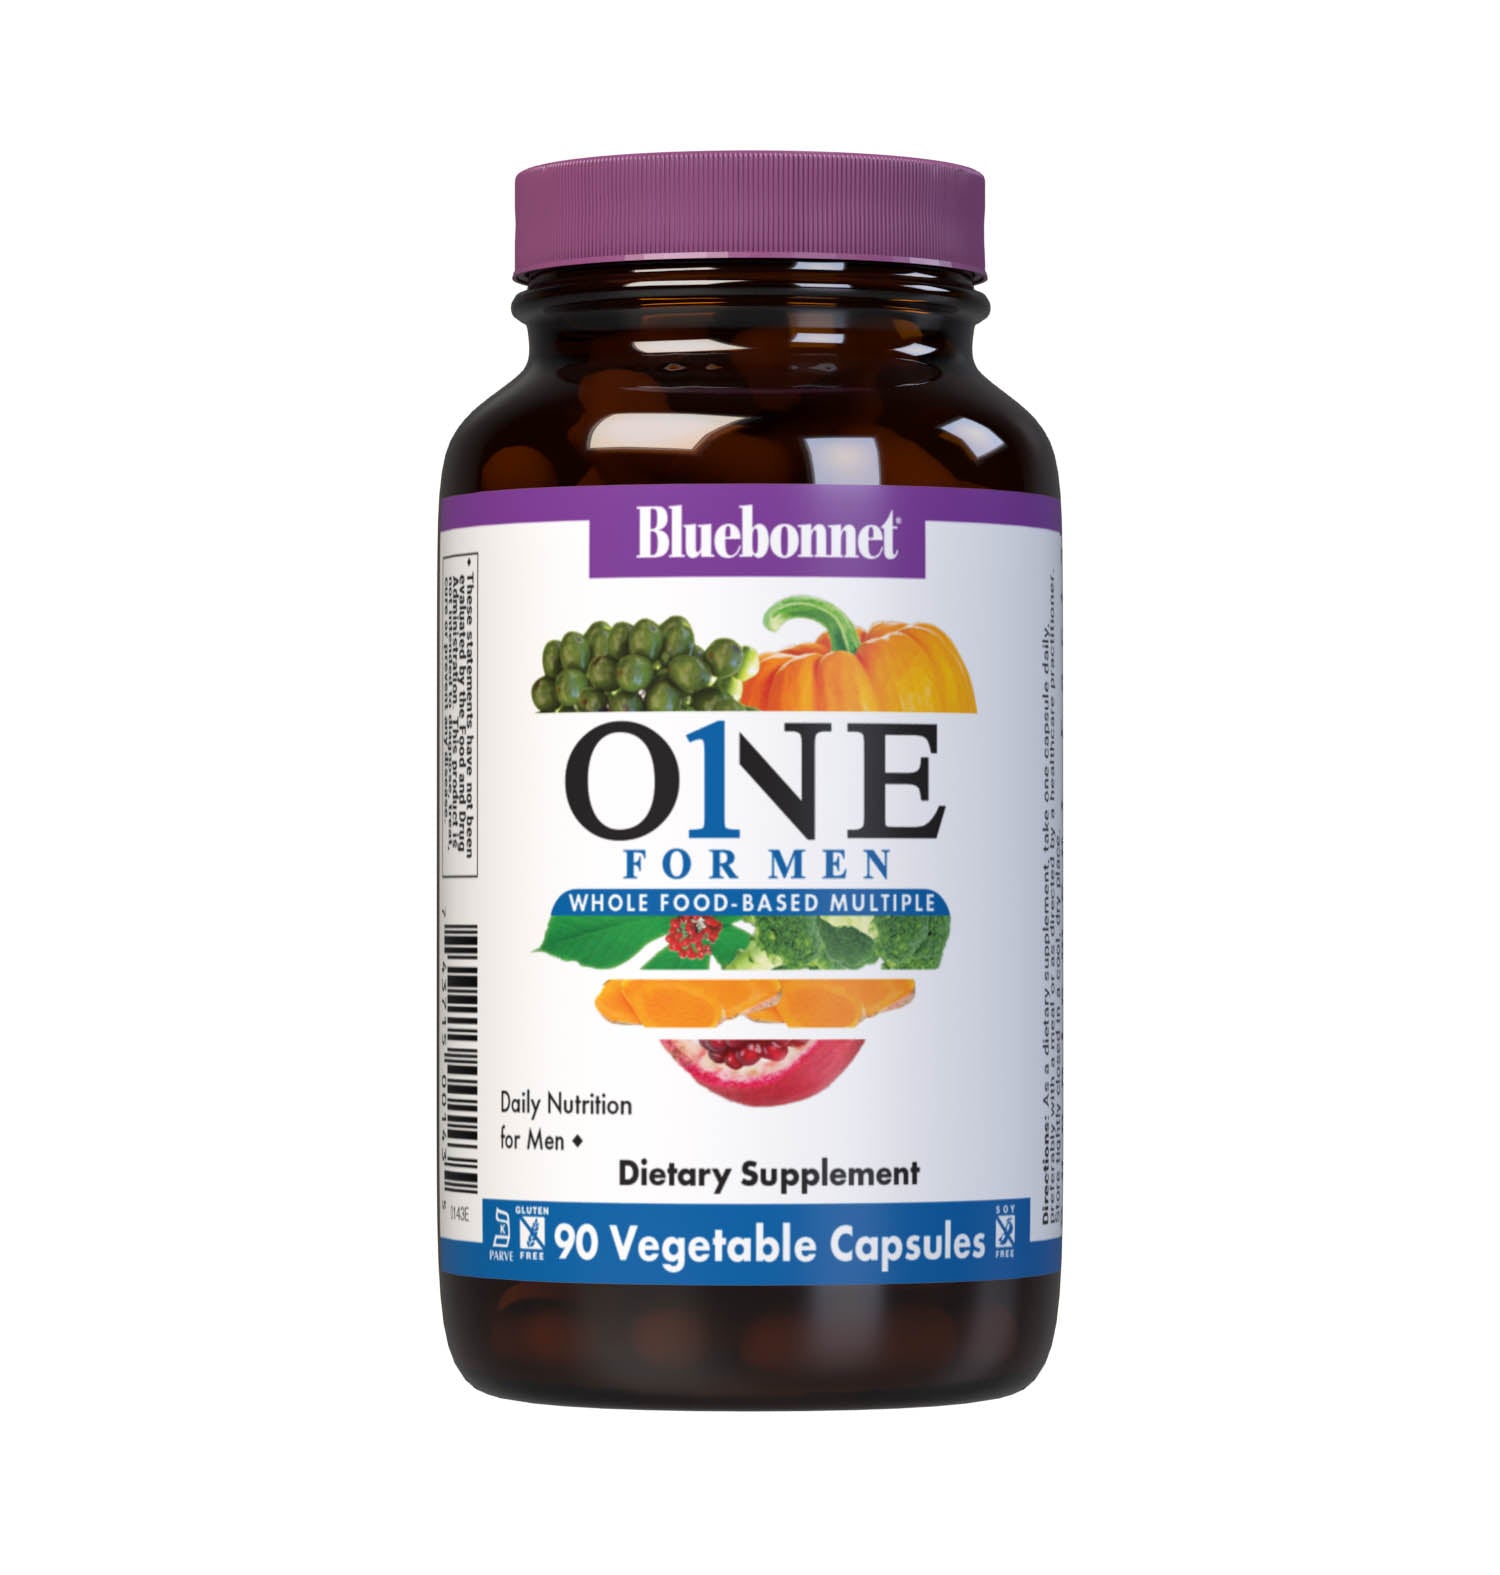 Bluebonnet’s Men's One Whole Food-Based Multiple 90 vegetable capsules is formulated with over 25 crucial nutrients like vitamin K2 and vitamin E from sunflower, all the coenzyme forms of the B vitamins, plus Albion chelated minerals in addition to an organic whole food vegetable blend, a plant-sourced enzyme blend, and a unique male health blend for daily nutrition and well being. #size_90 count